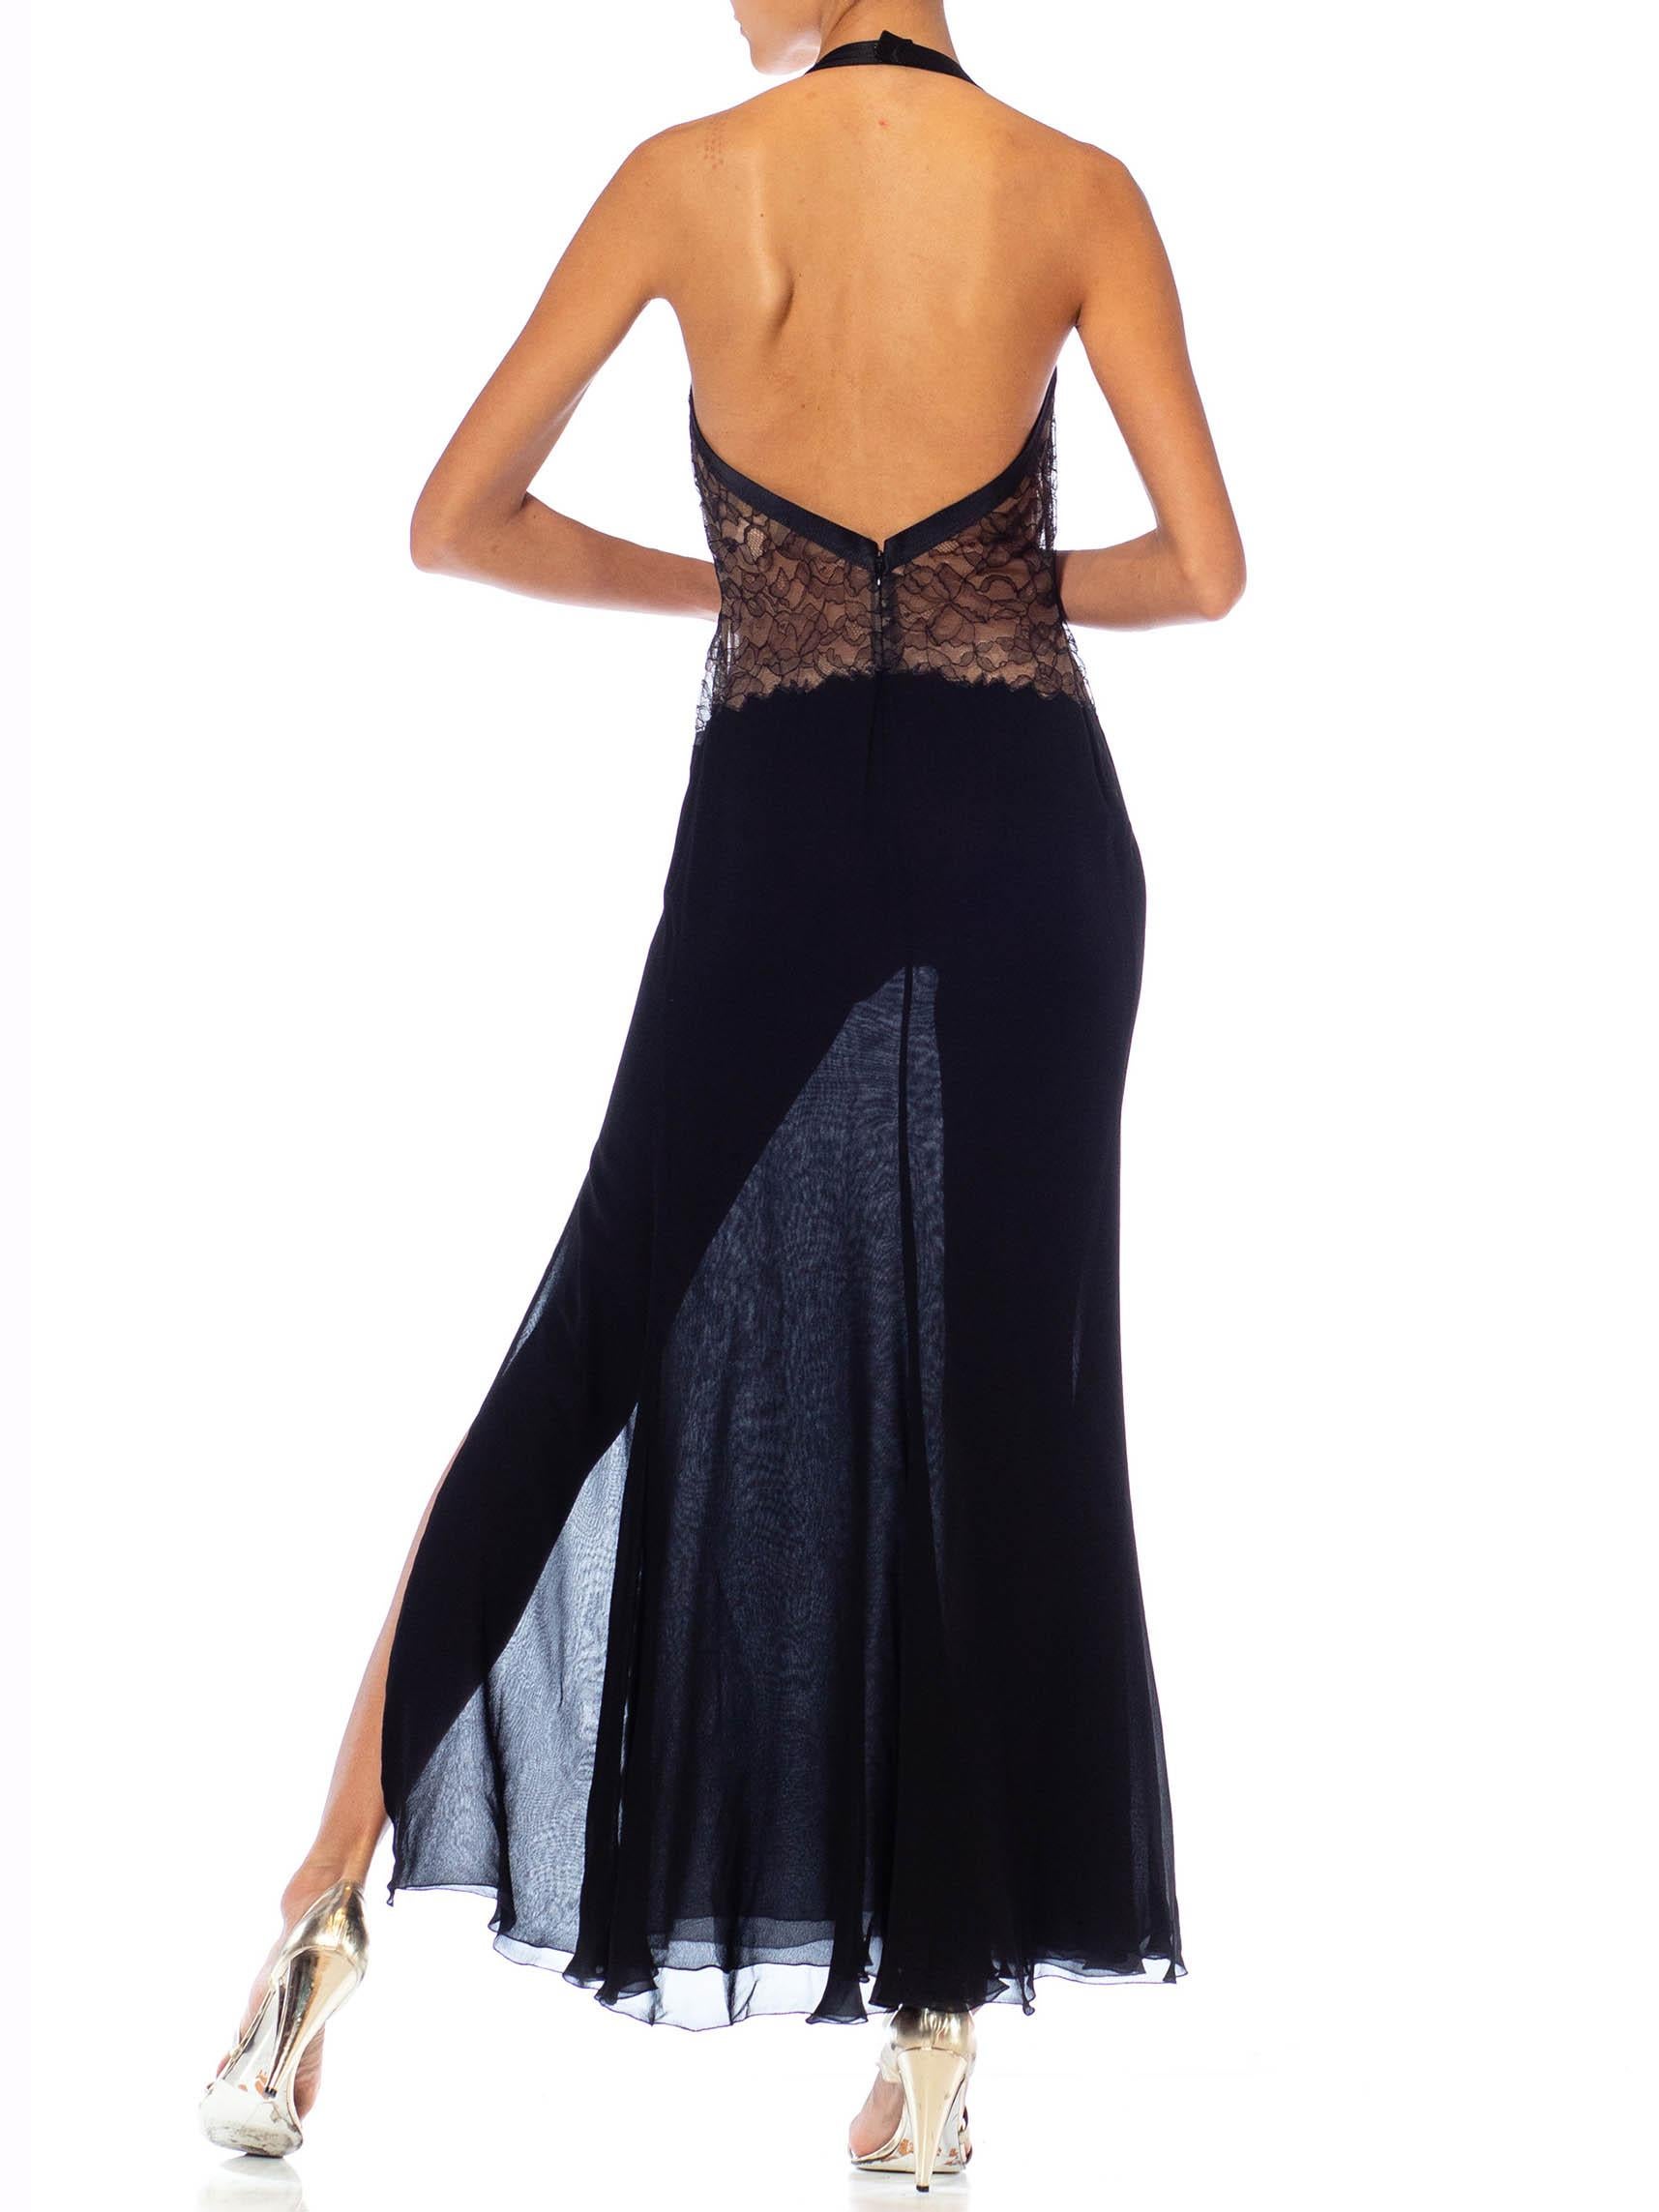 1990S Gianni Versace Black Silk Chiffon & Lace Lingerie Gown With High Slit 2